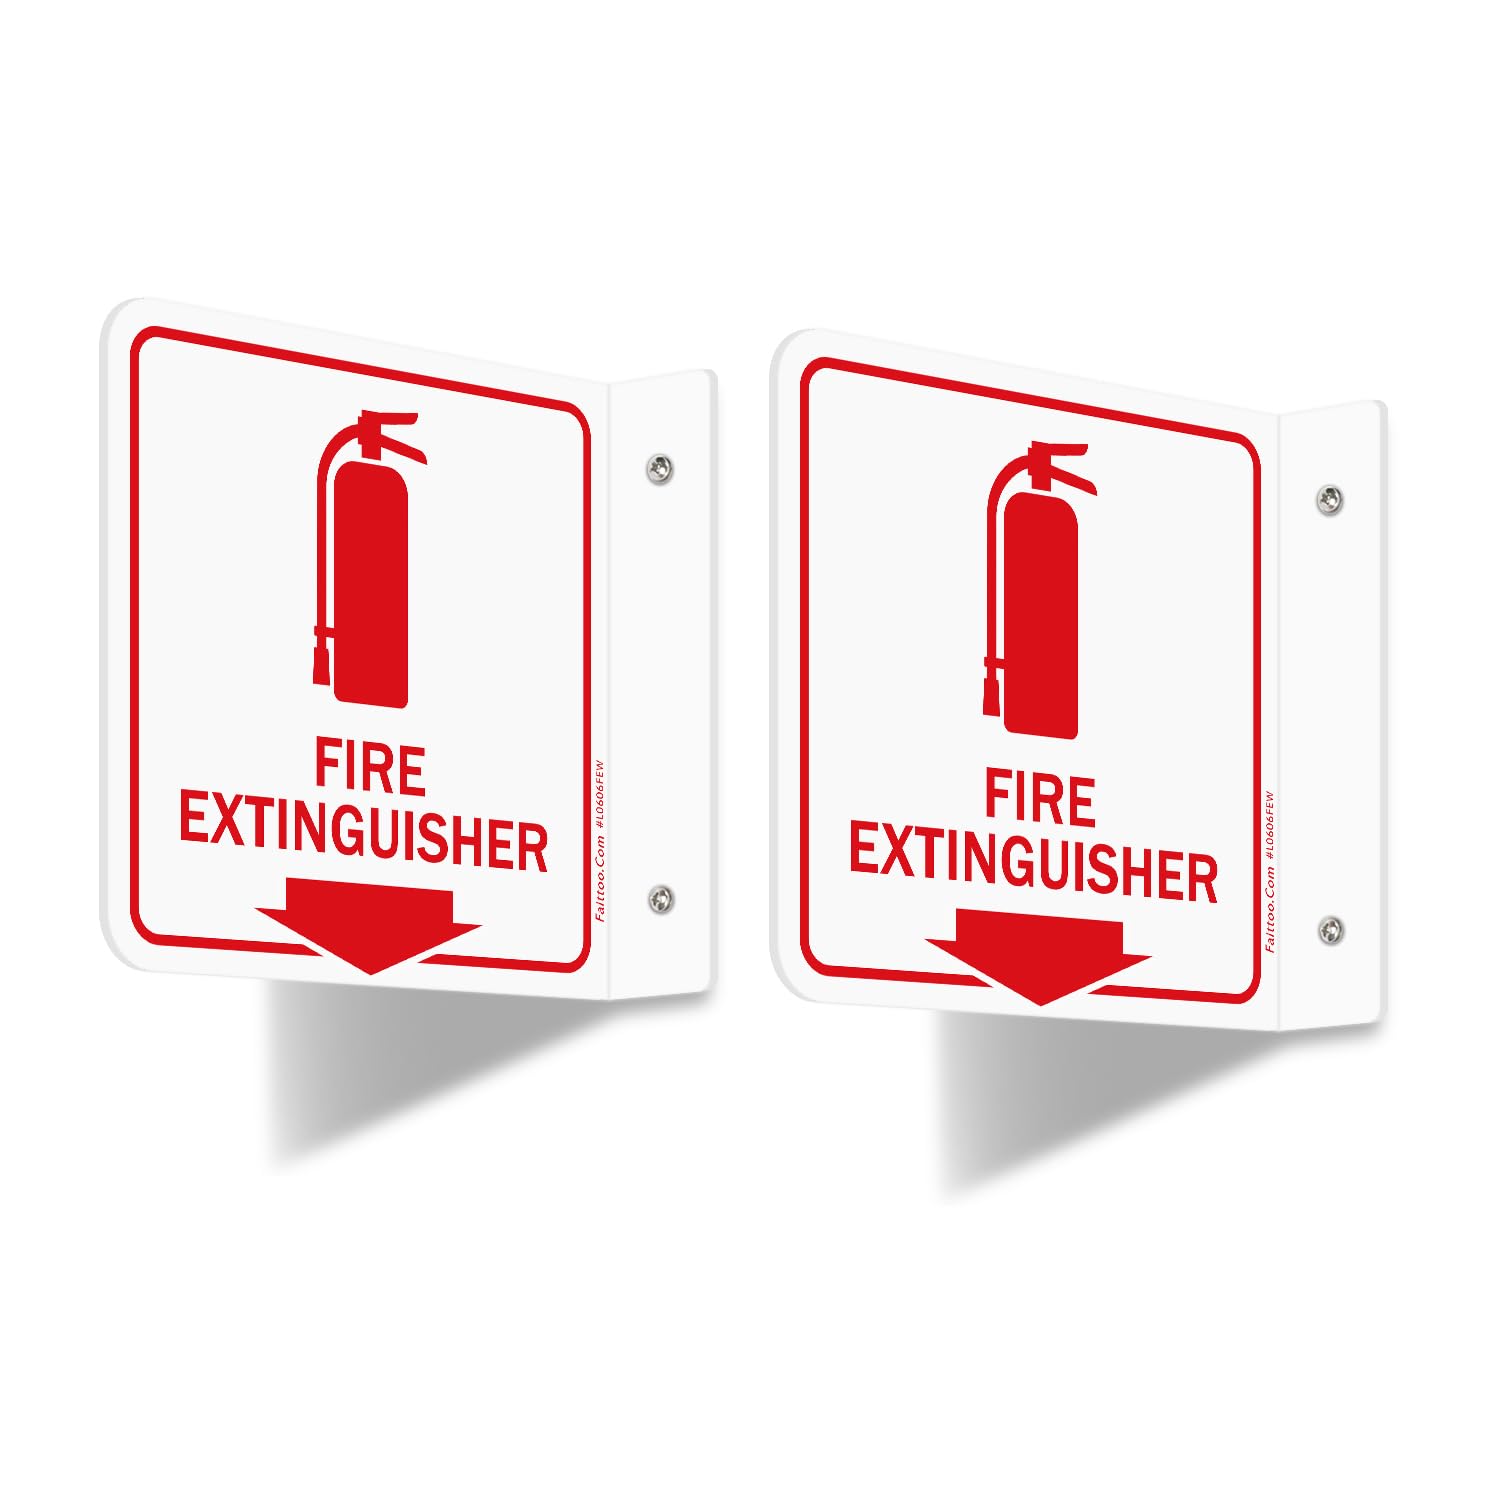 Faittoo Fire Extinguisher Sign, 2 Pack Fire Extinguisher with Down Arrow - 6 x 6 Inches Acrylic Plastic, 2 Pre-Drilled Holes, Includes Matching Screws, Easy To Mount, Use for Home Office/Business